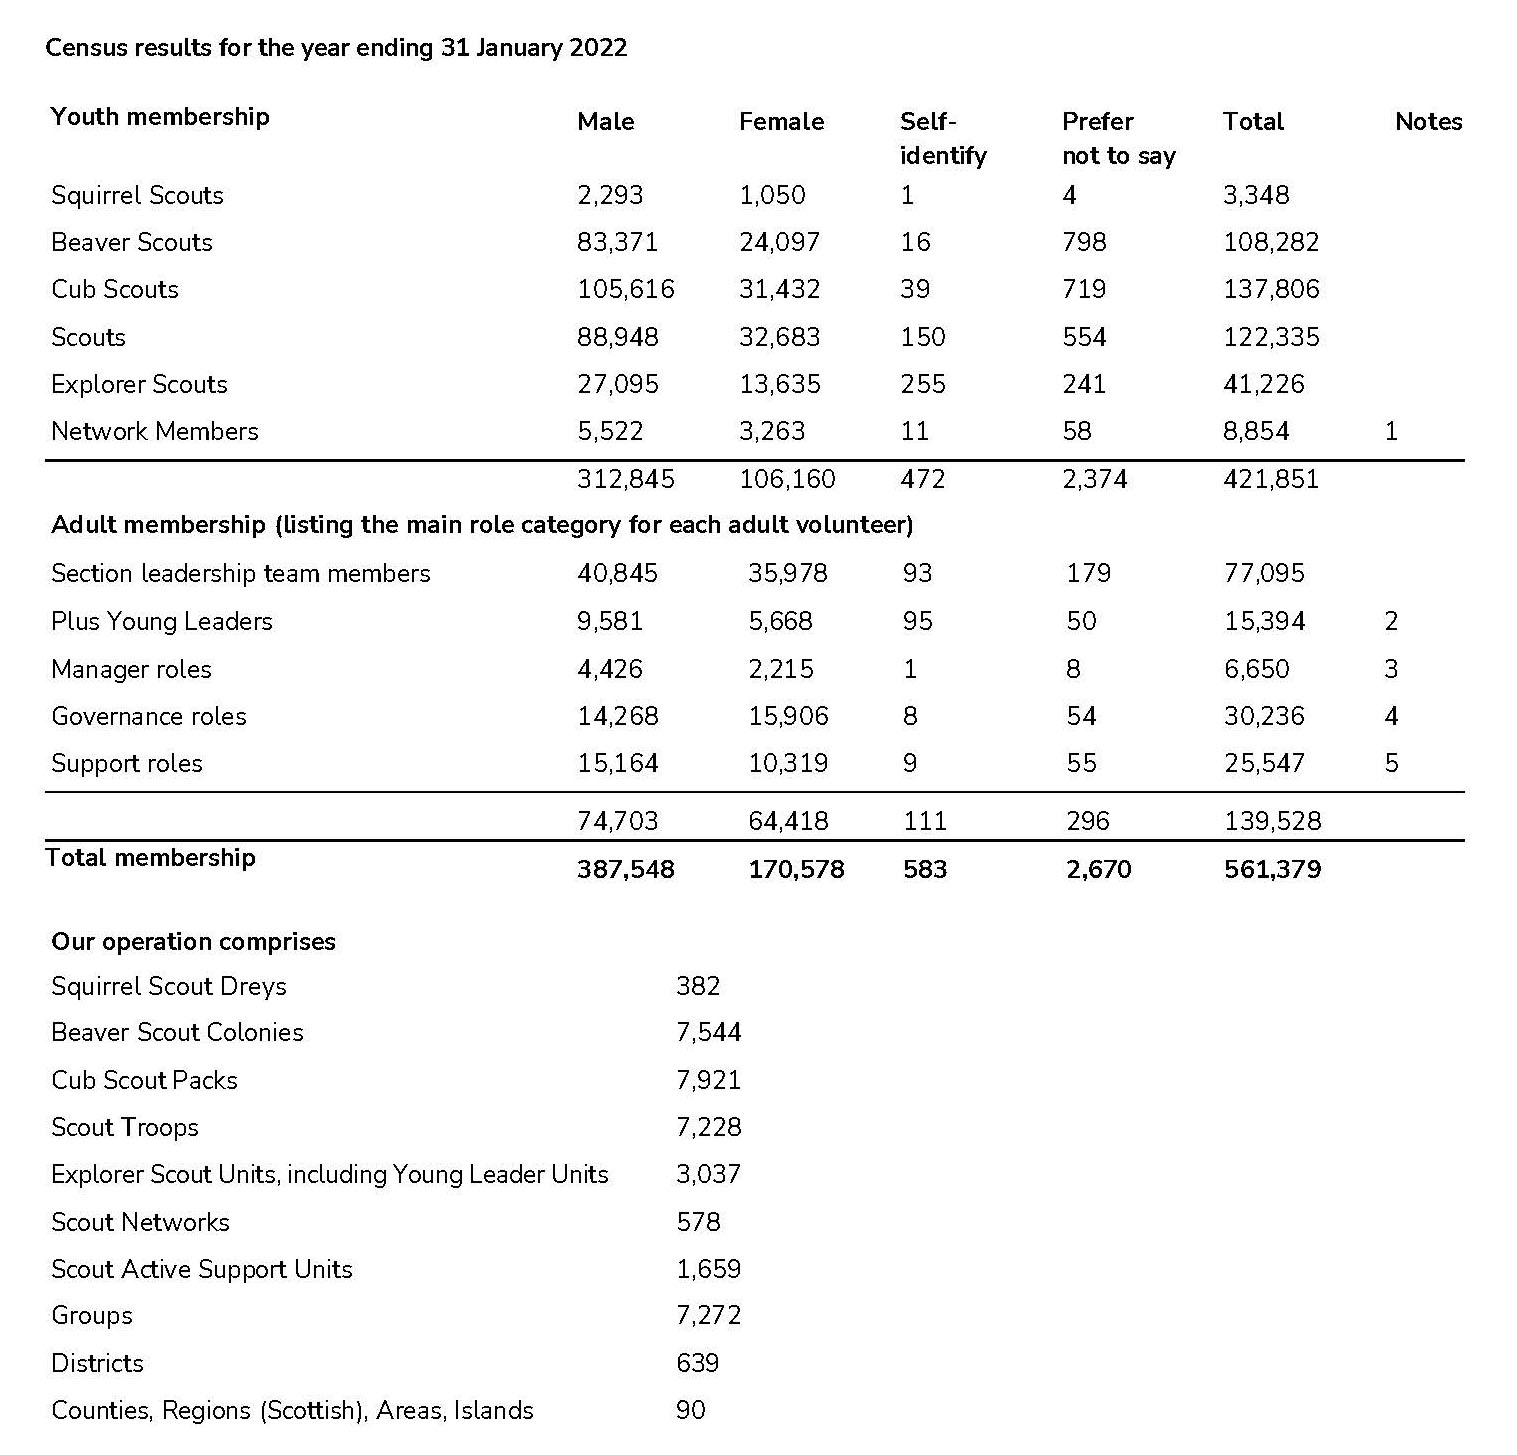 Table showing Scouts census results for the year ending 31 January 2022